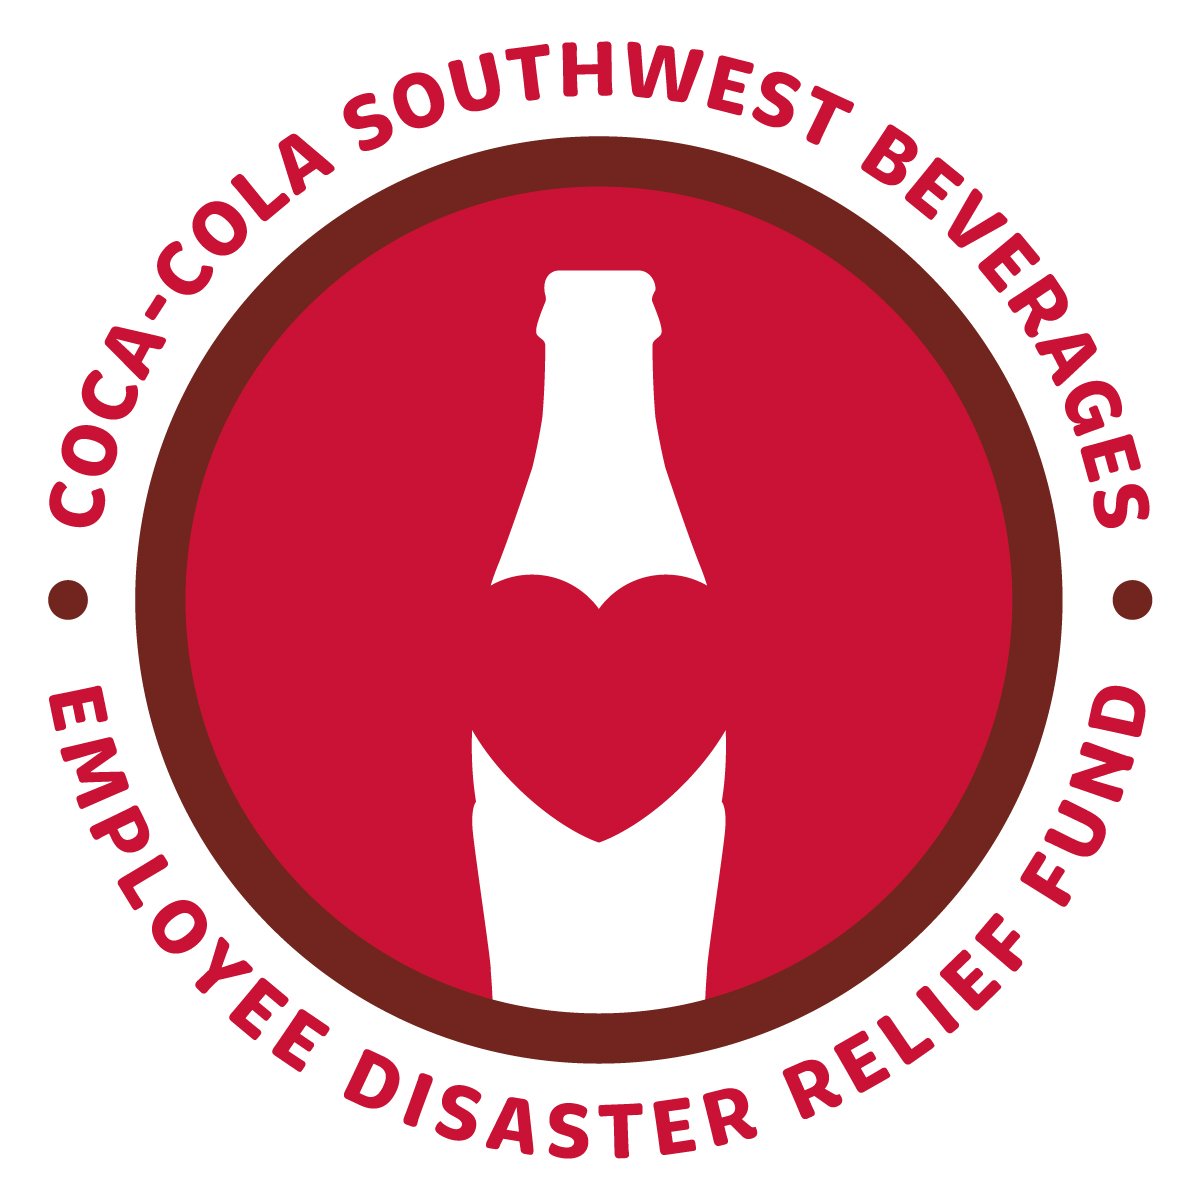 CCSWB Disaster Relief